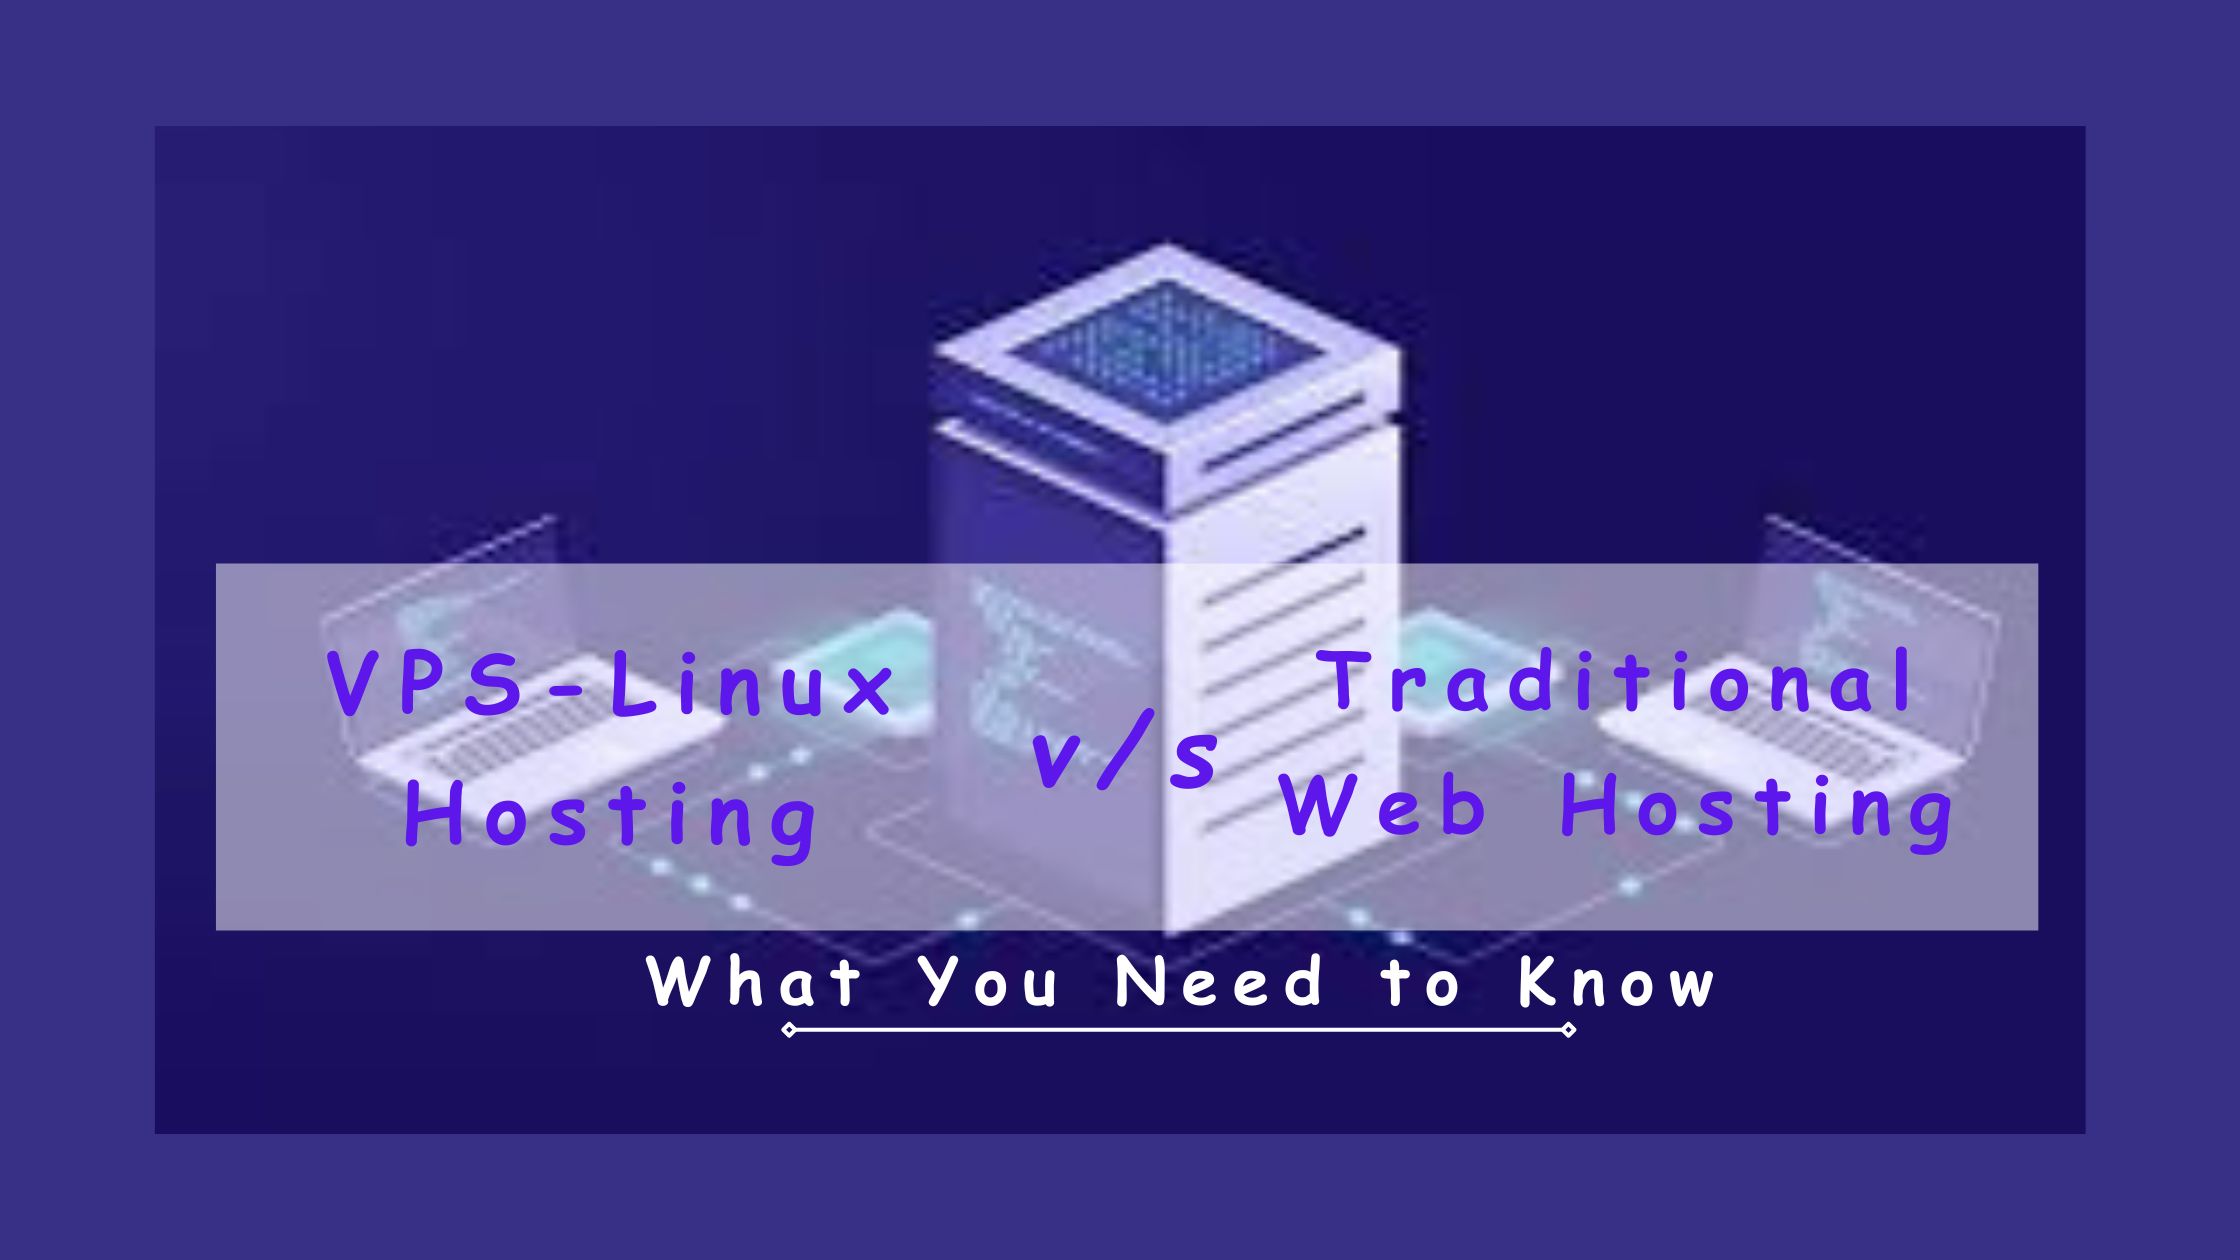 VPS-Linux-Hosting vs Traditional Web Hosting: What You Need to Know